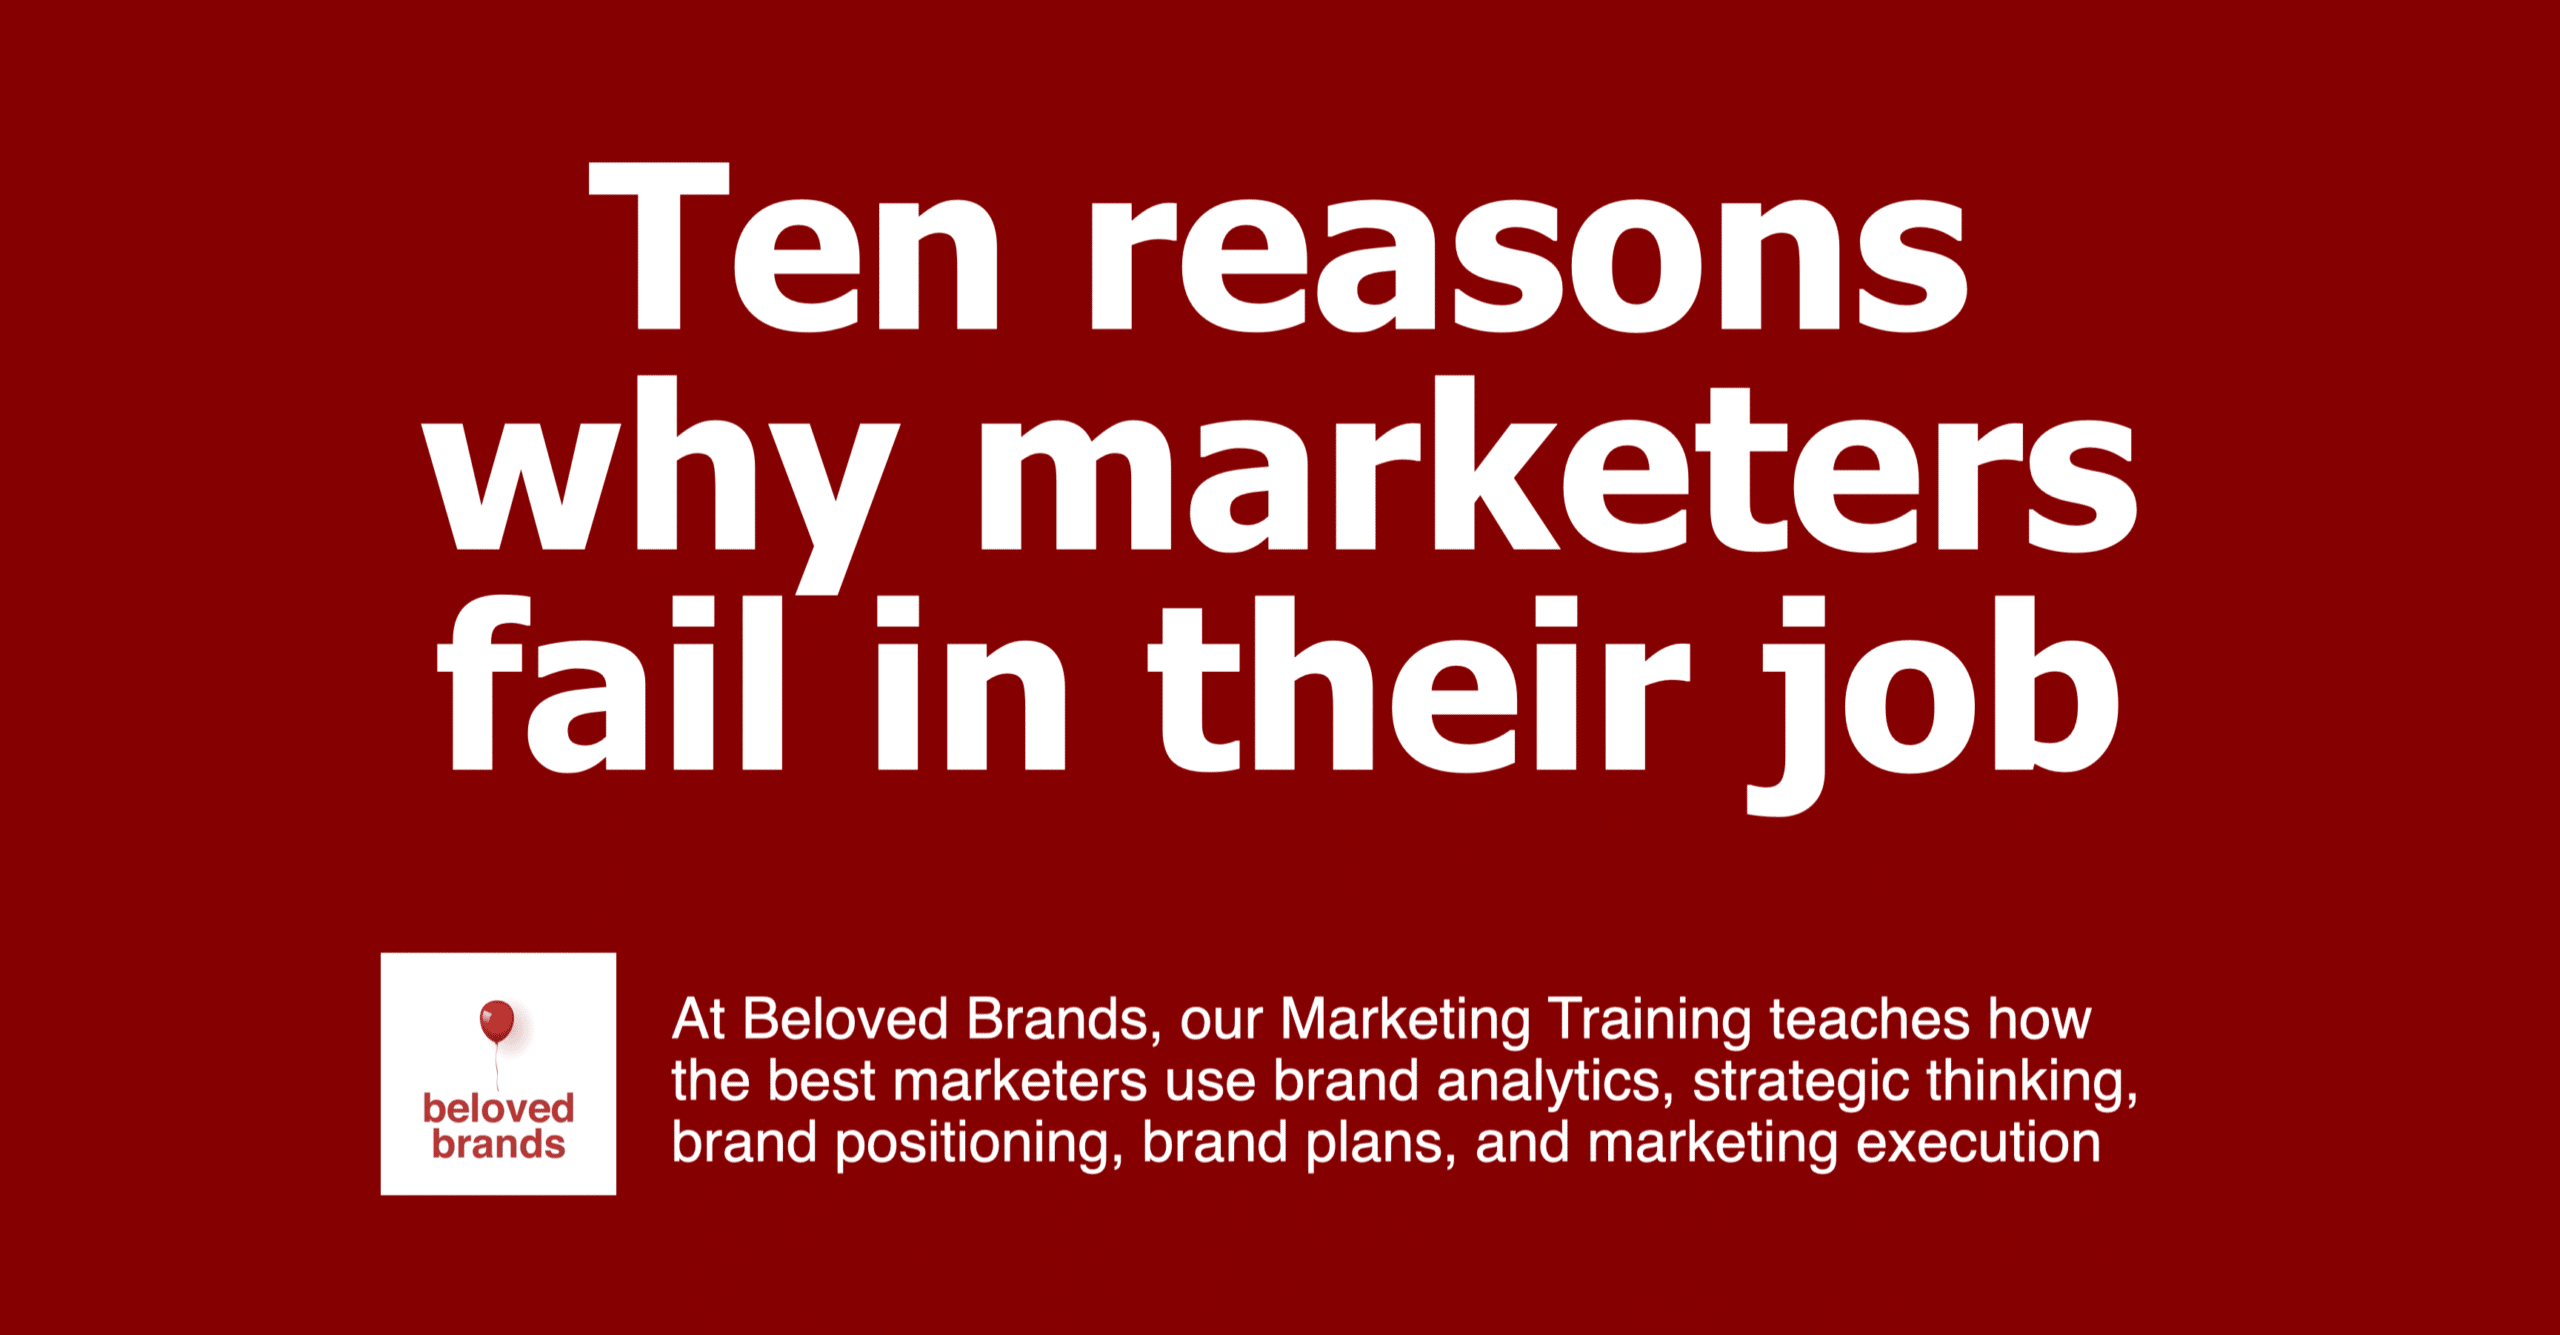 Why marketers fail brand manager job